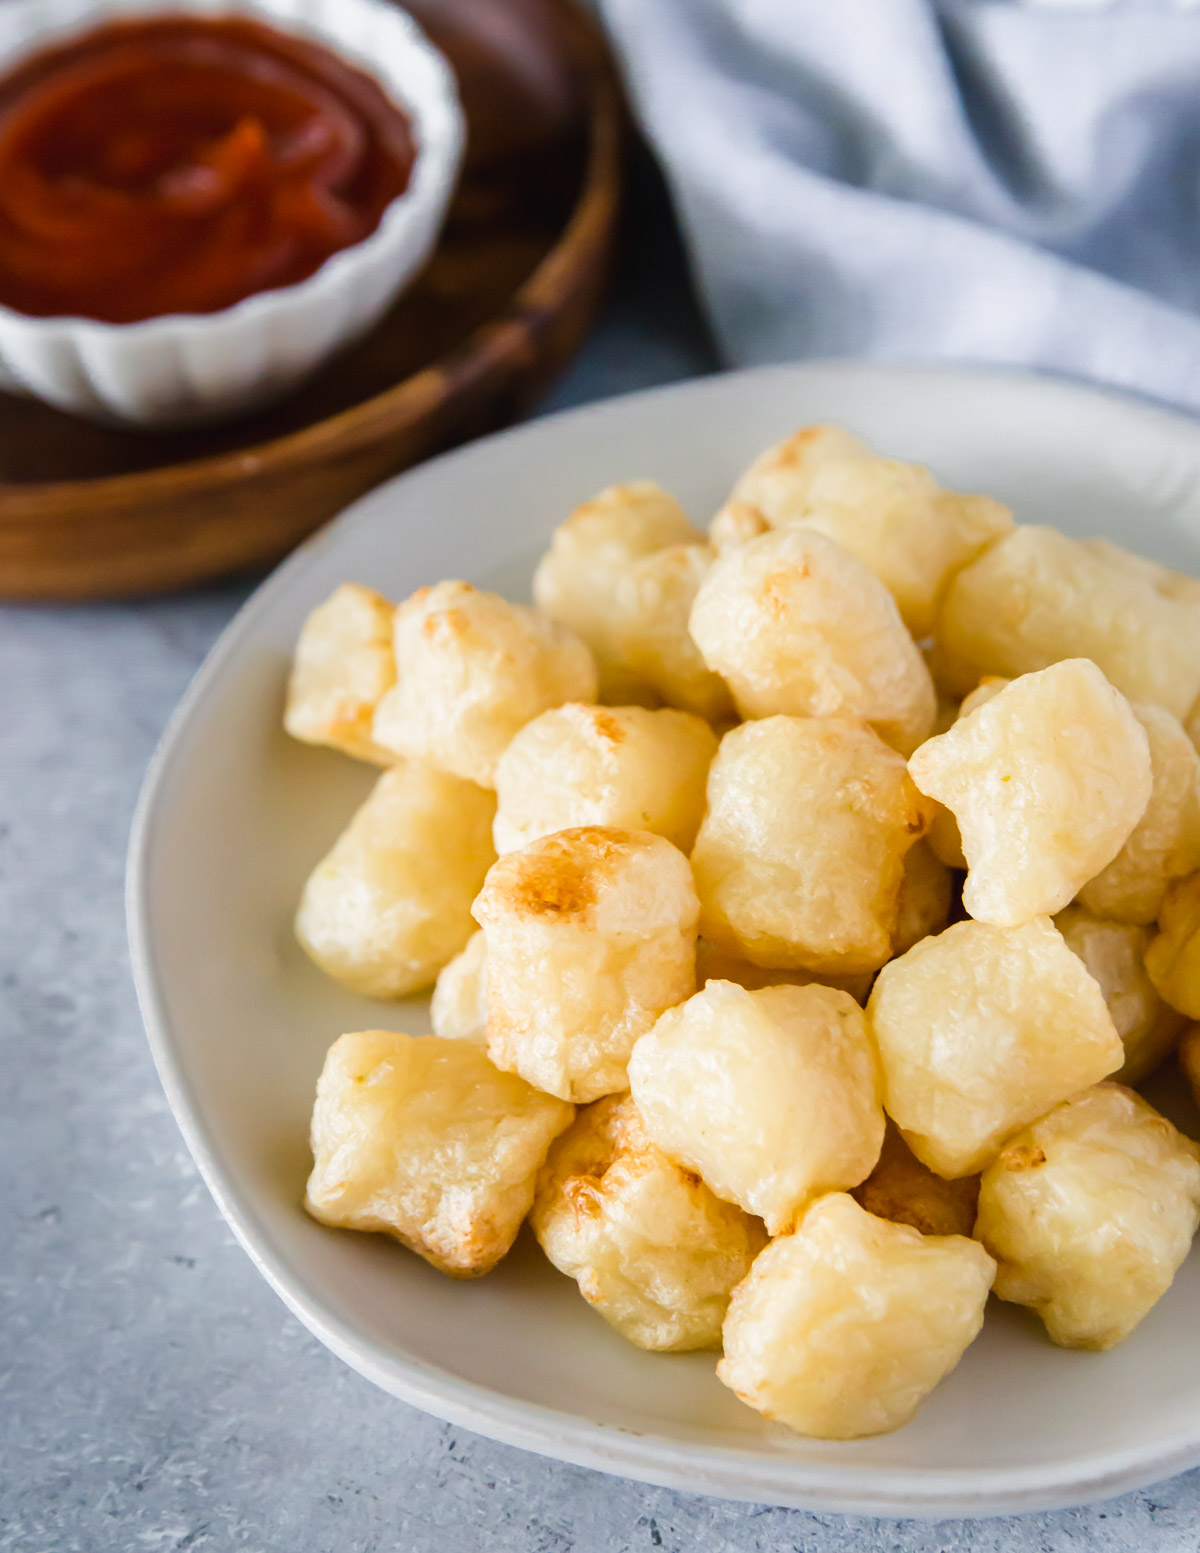 Crispy cauliflower gnocchi can be eaten as an appetizer, topped with your favorite condiments like ketchup.